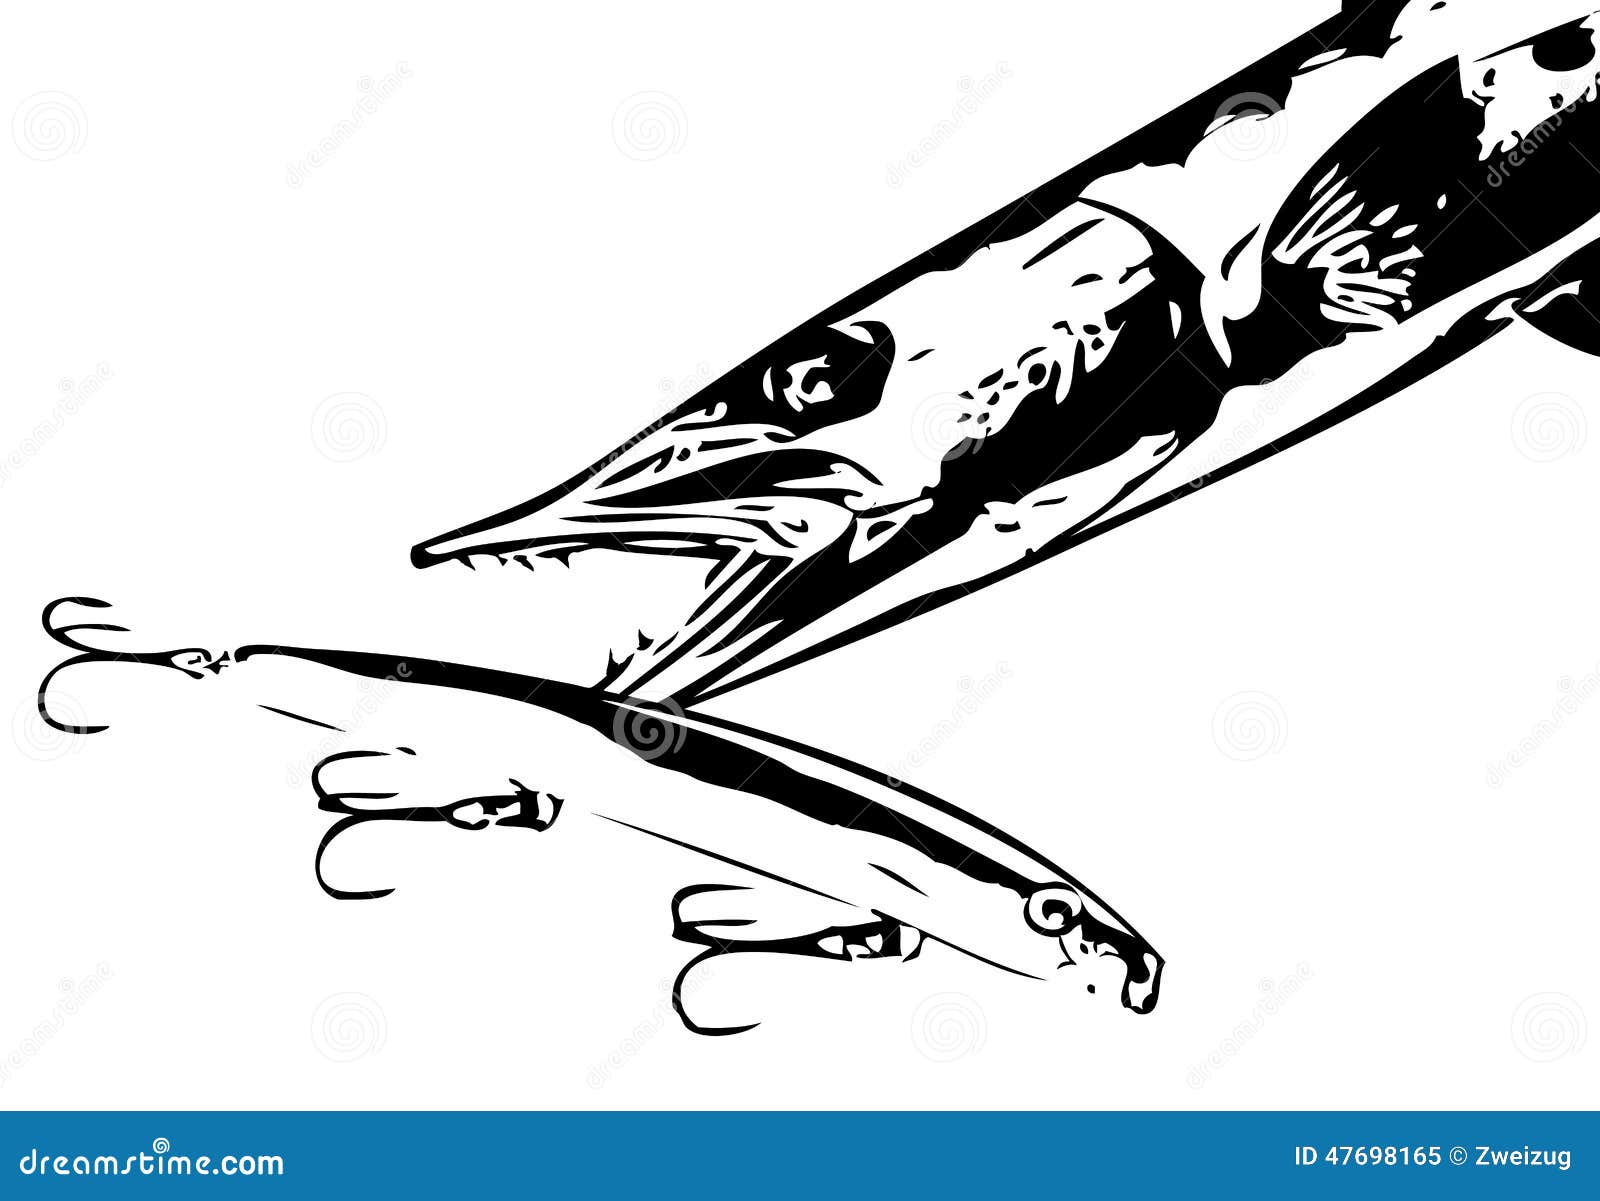 Barracuda Attacking Lure Vector Stock Vector - Illustration of